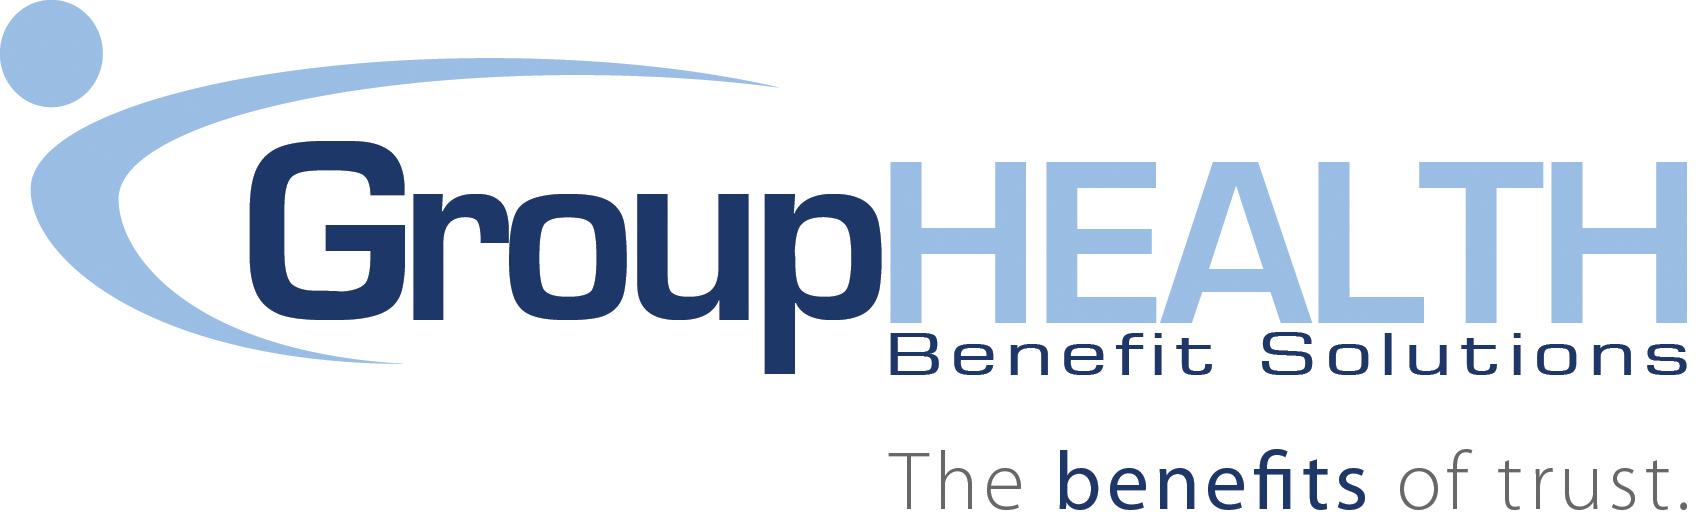 Group Health Benefit Solutions The benefits of trust logo